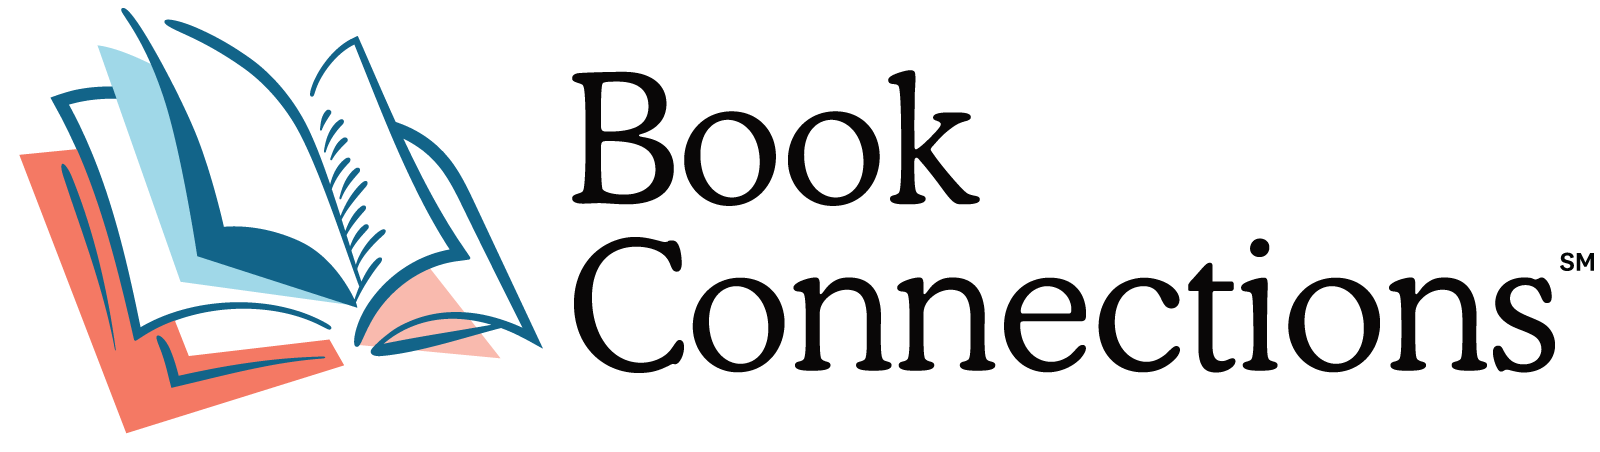 Book Connections-For book lovers!